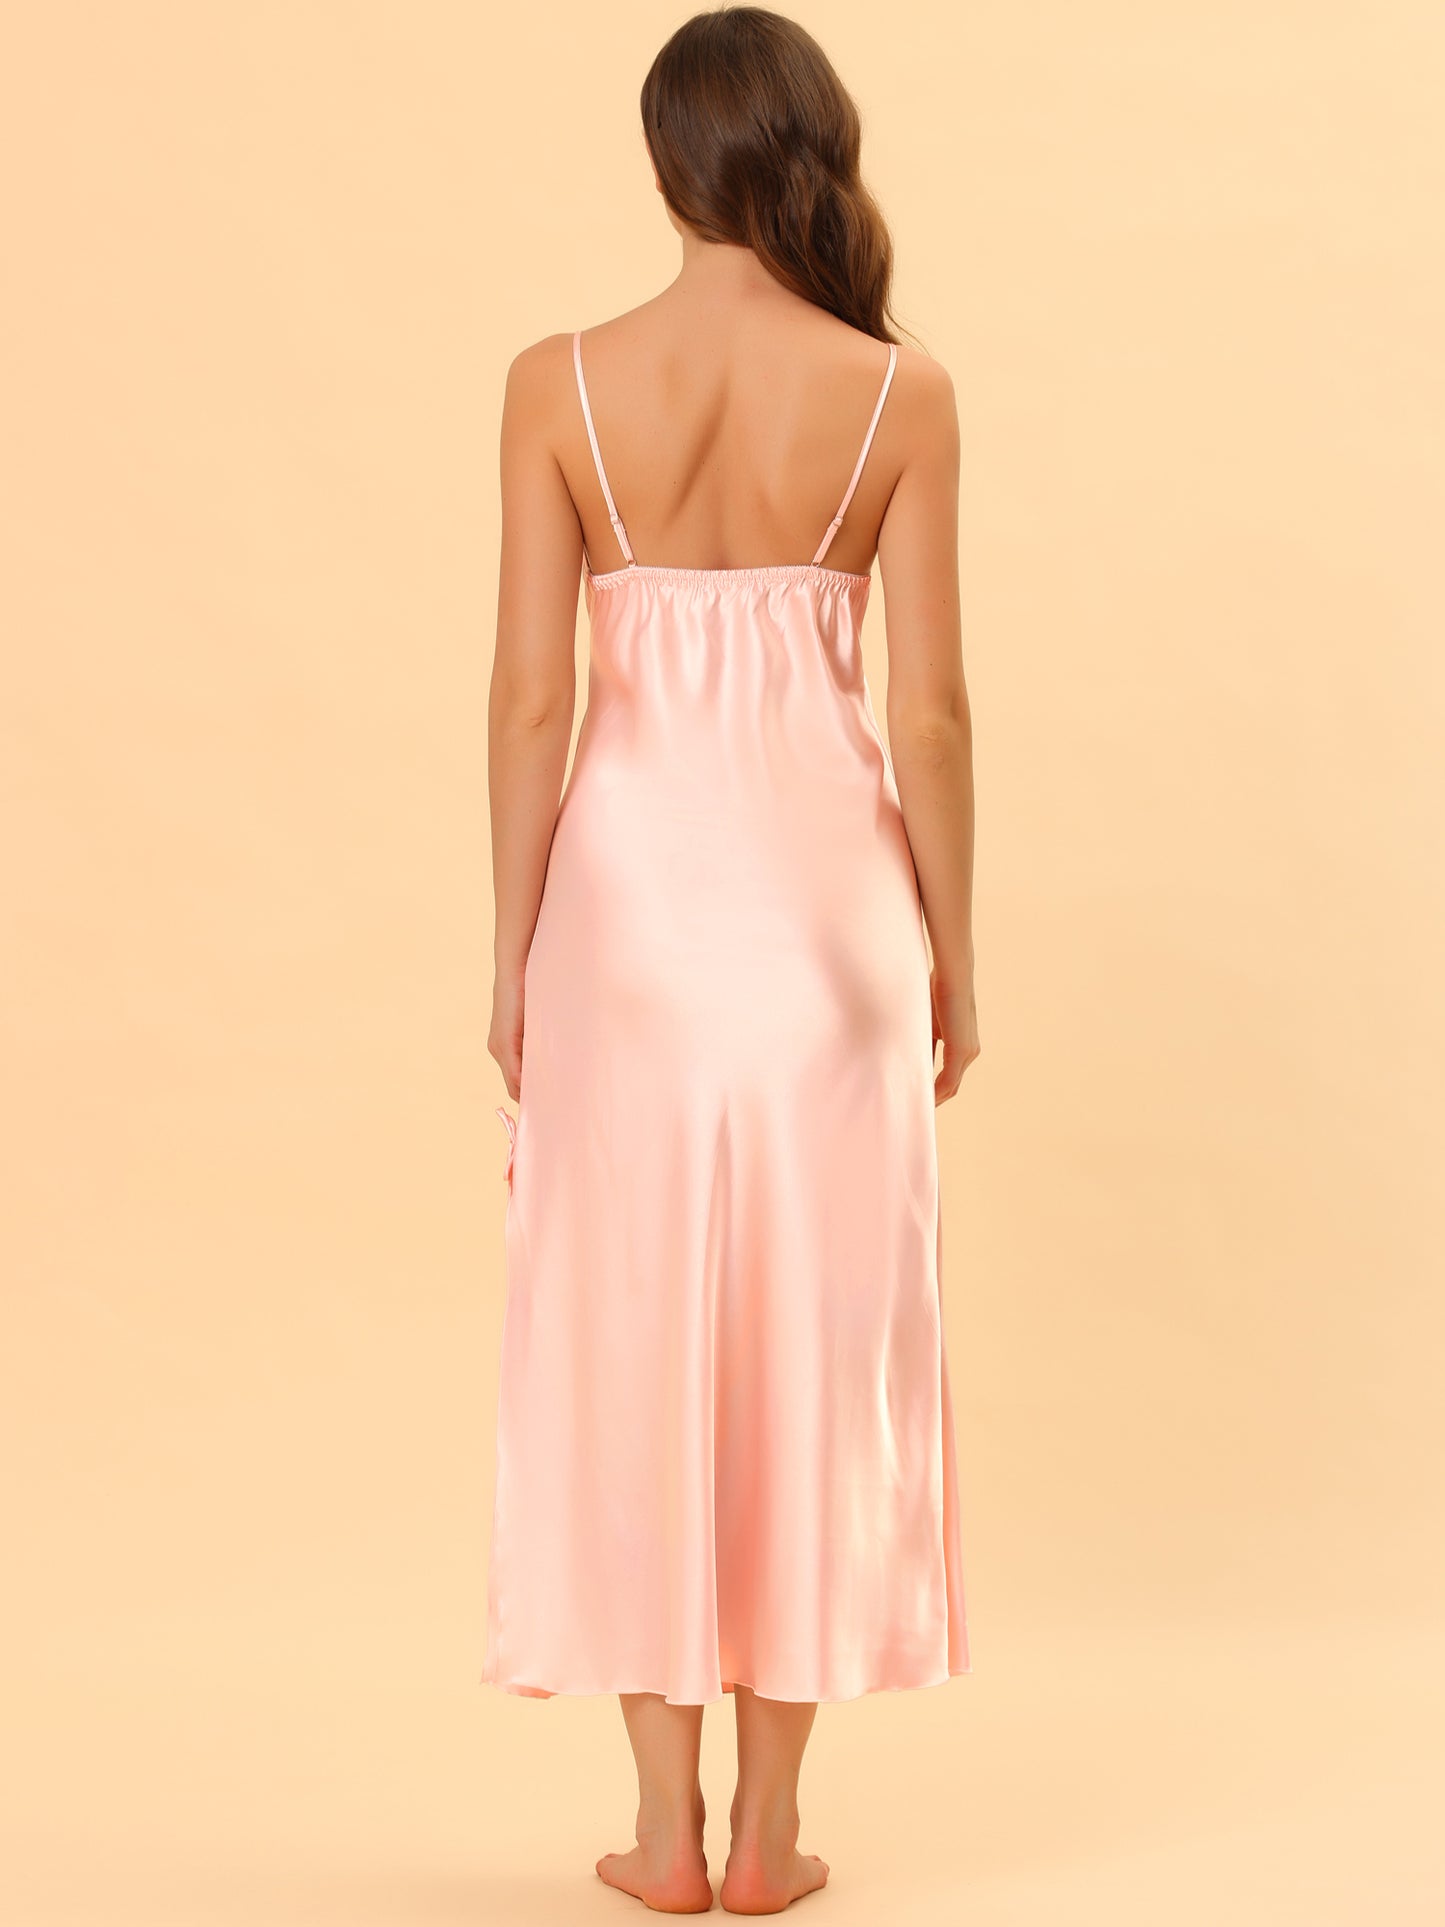 cheibear Satin Slip Dress Chemise Silky Lounge Camisole Maxi Nightgowns Pink